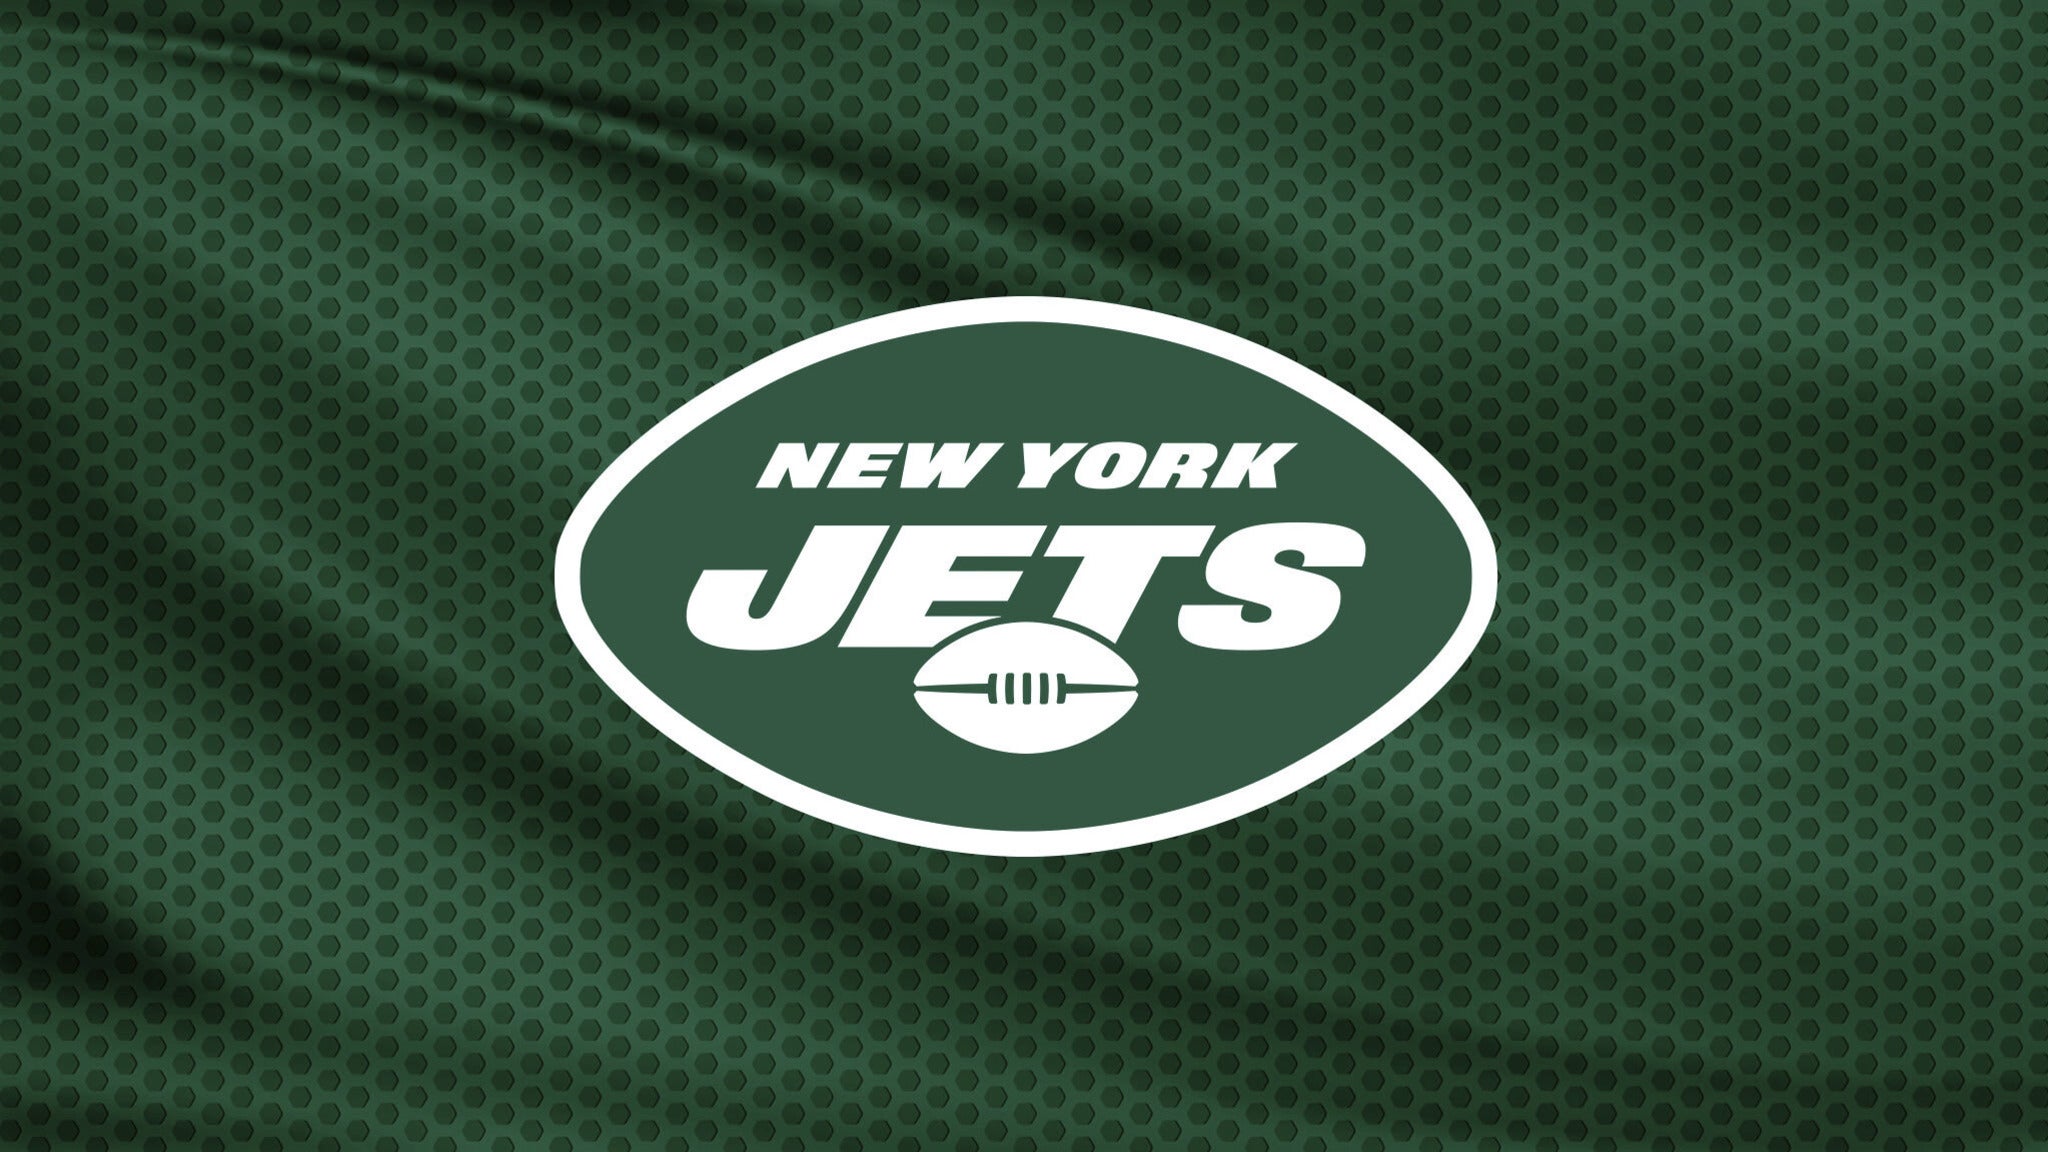 next game for jets